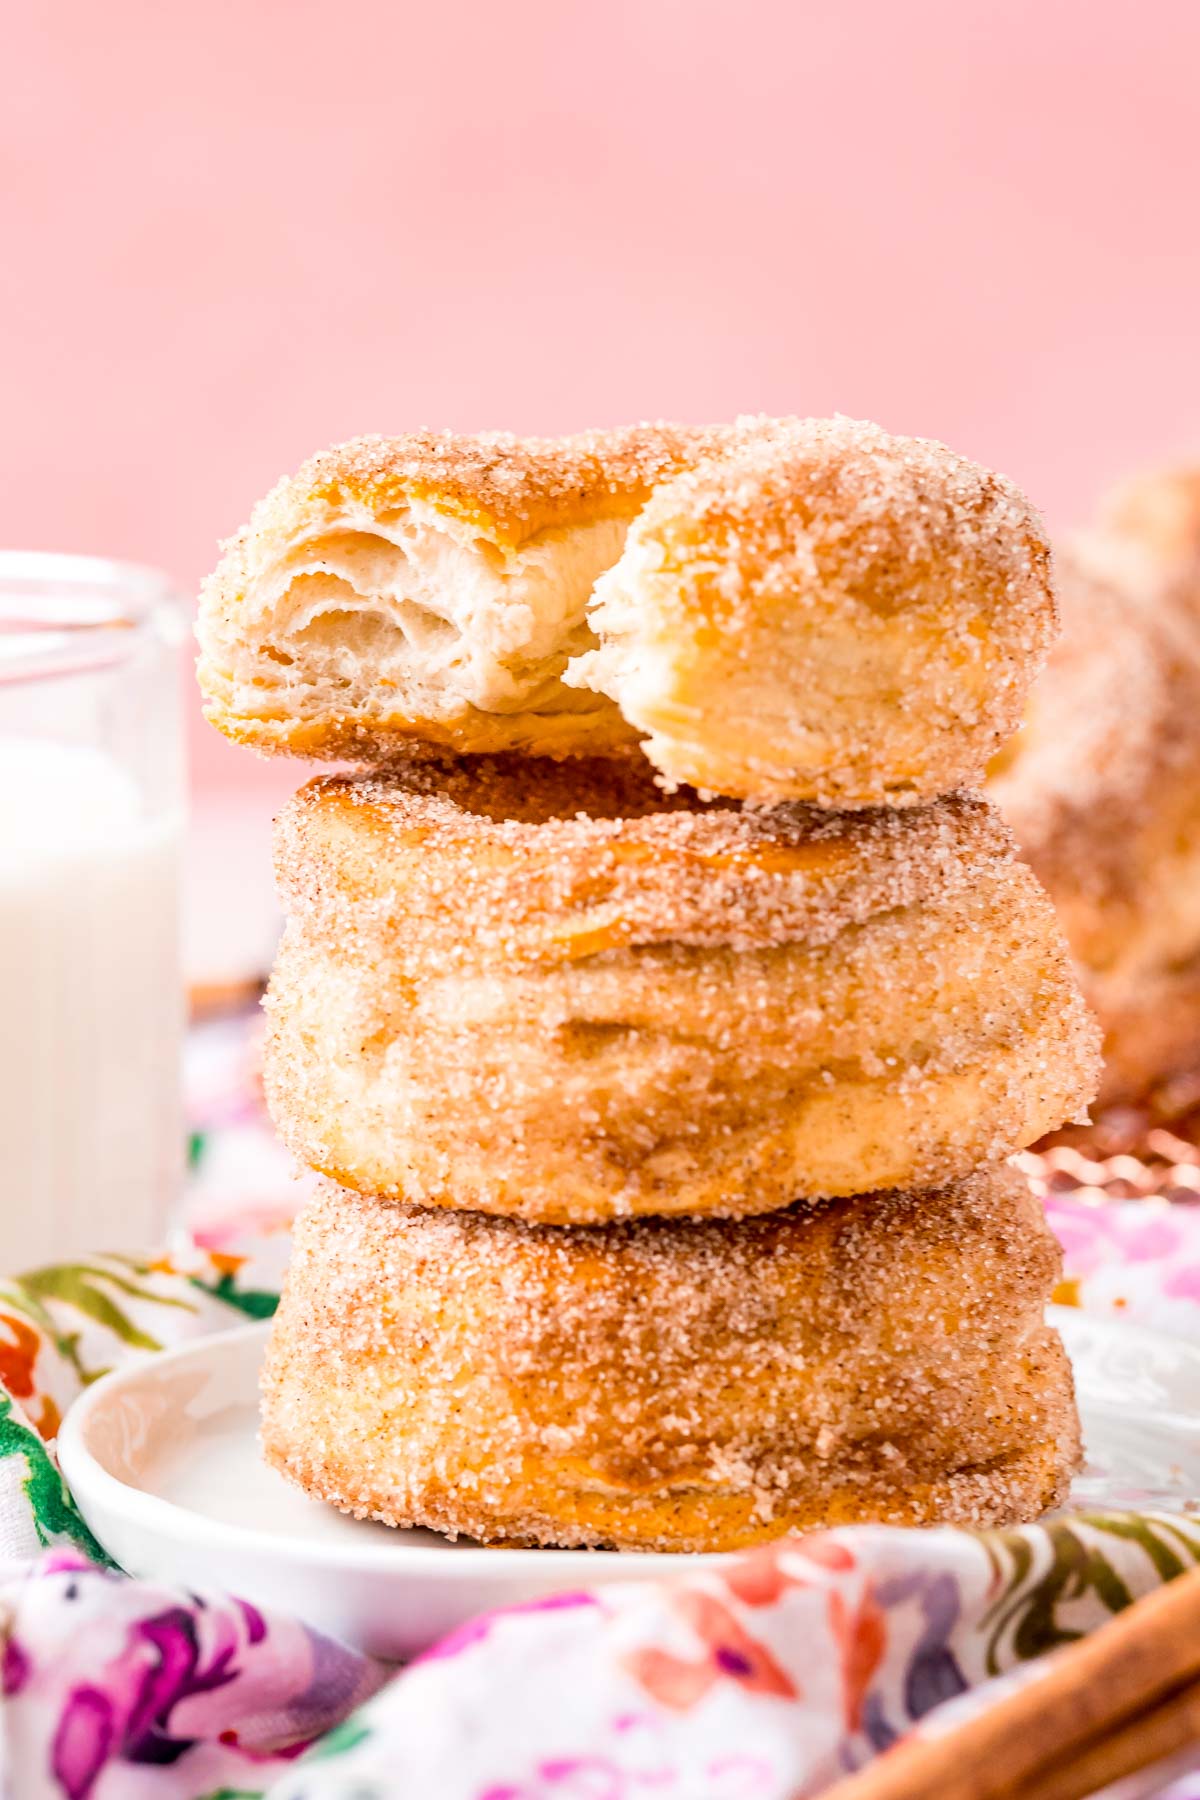 Three cinnamon sugar donuts stacked on top of each other with a bite taken out of the top one.